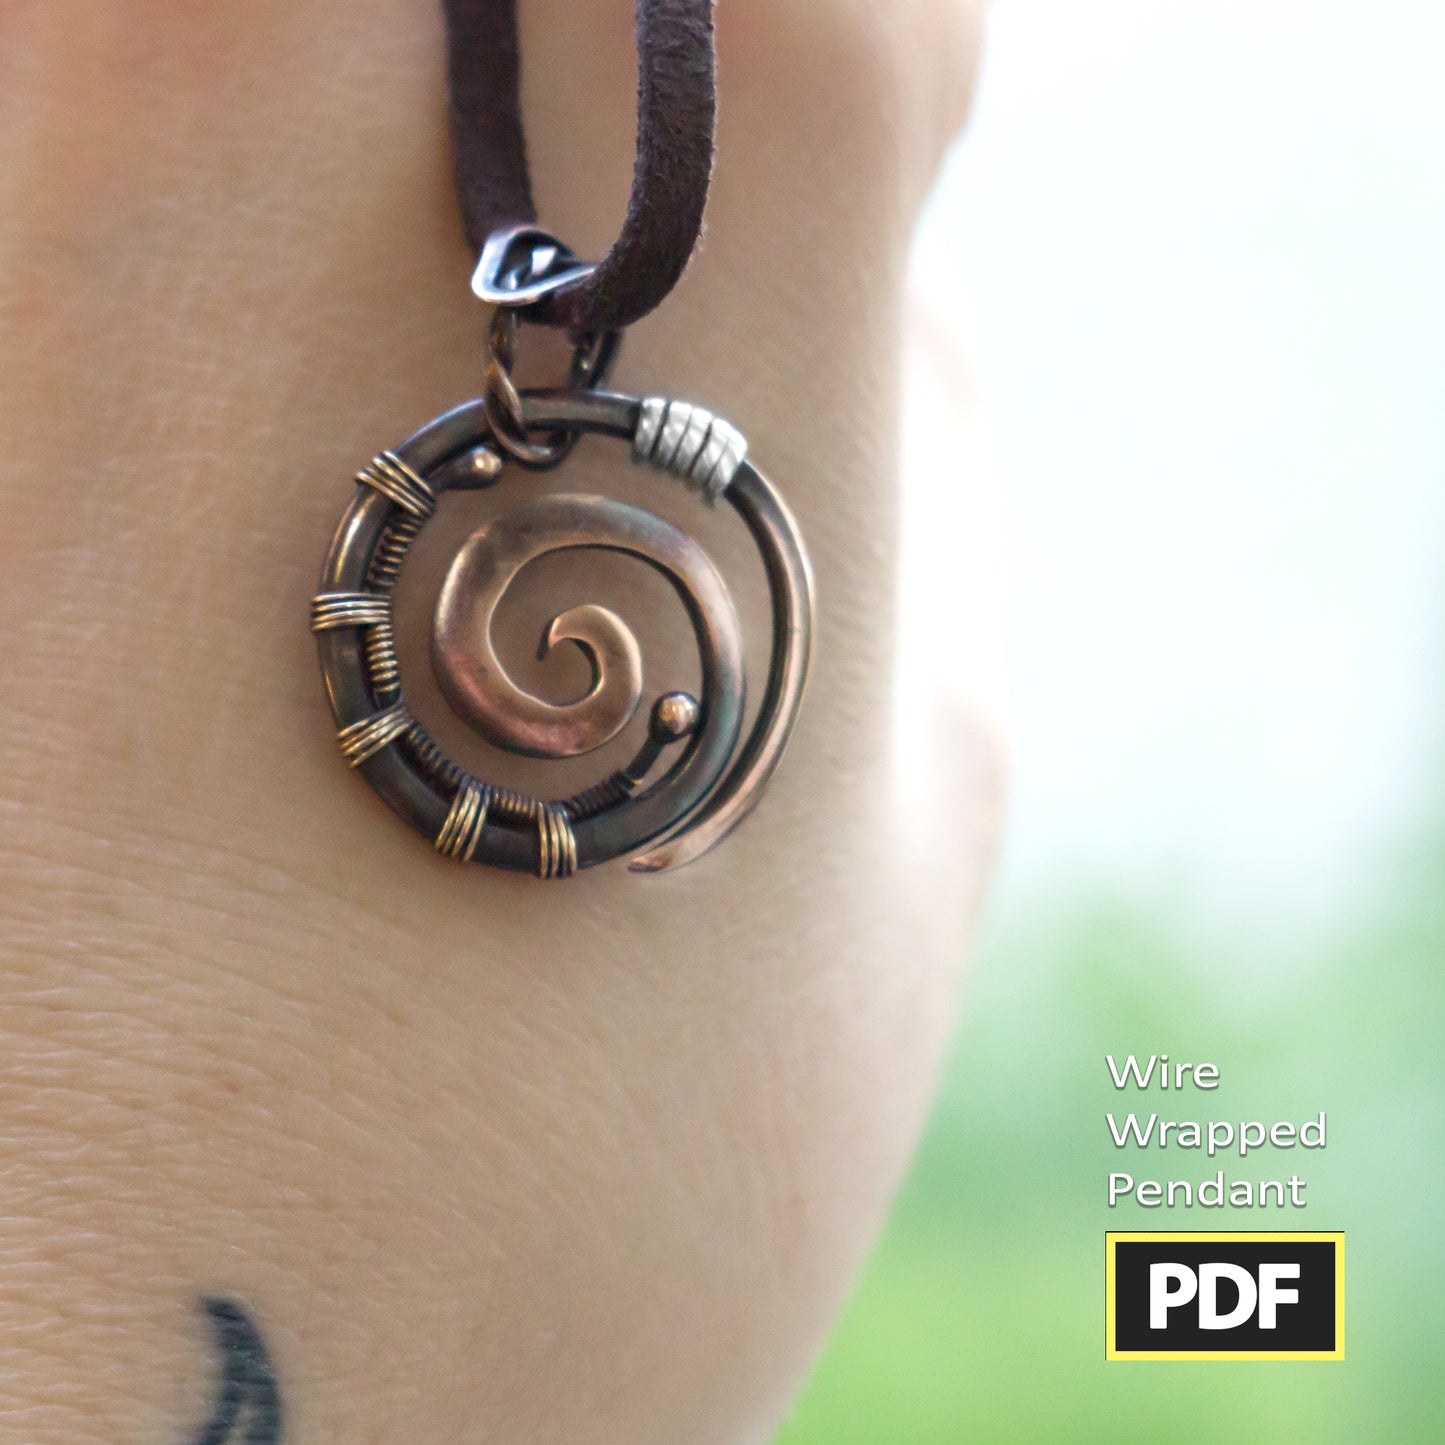 Simple Beginner Wire Wrap PDF Jewelry Tutorial | No Soldering | Spiral copper necklace Step by step diy | Artarina | See DESCRIPTION BELOW 